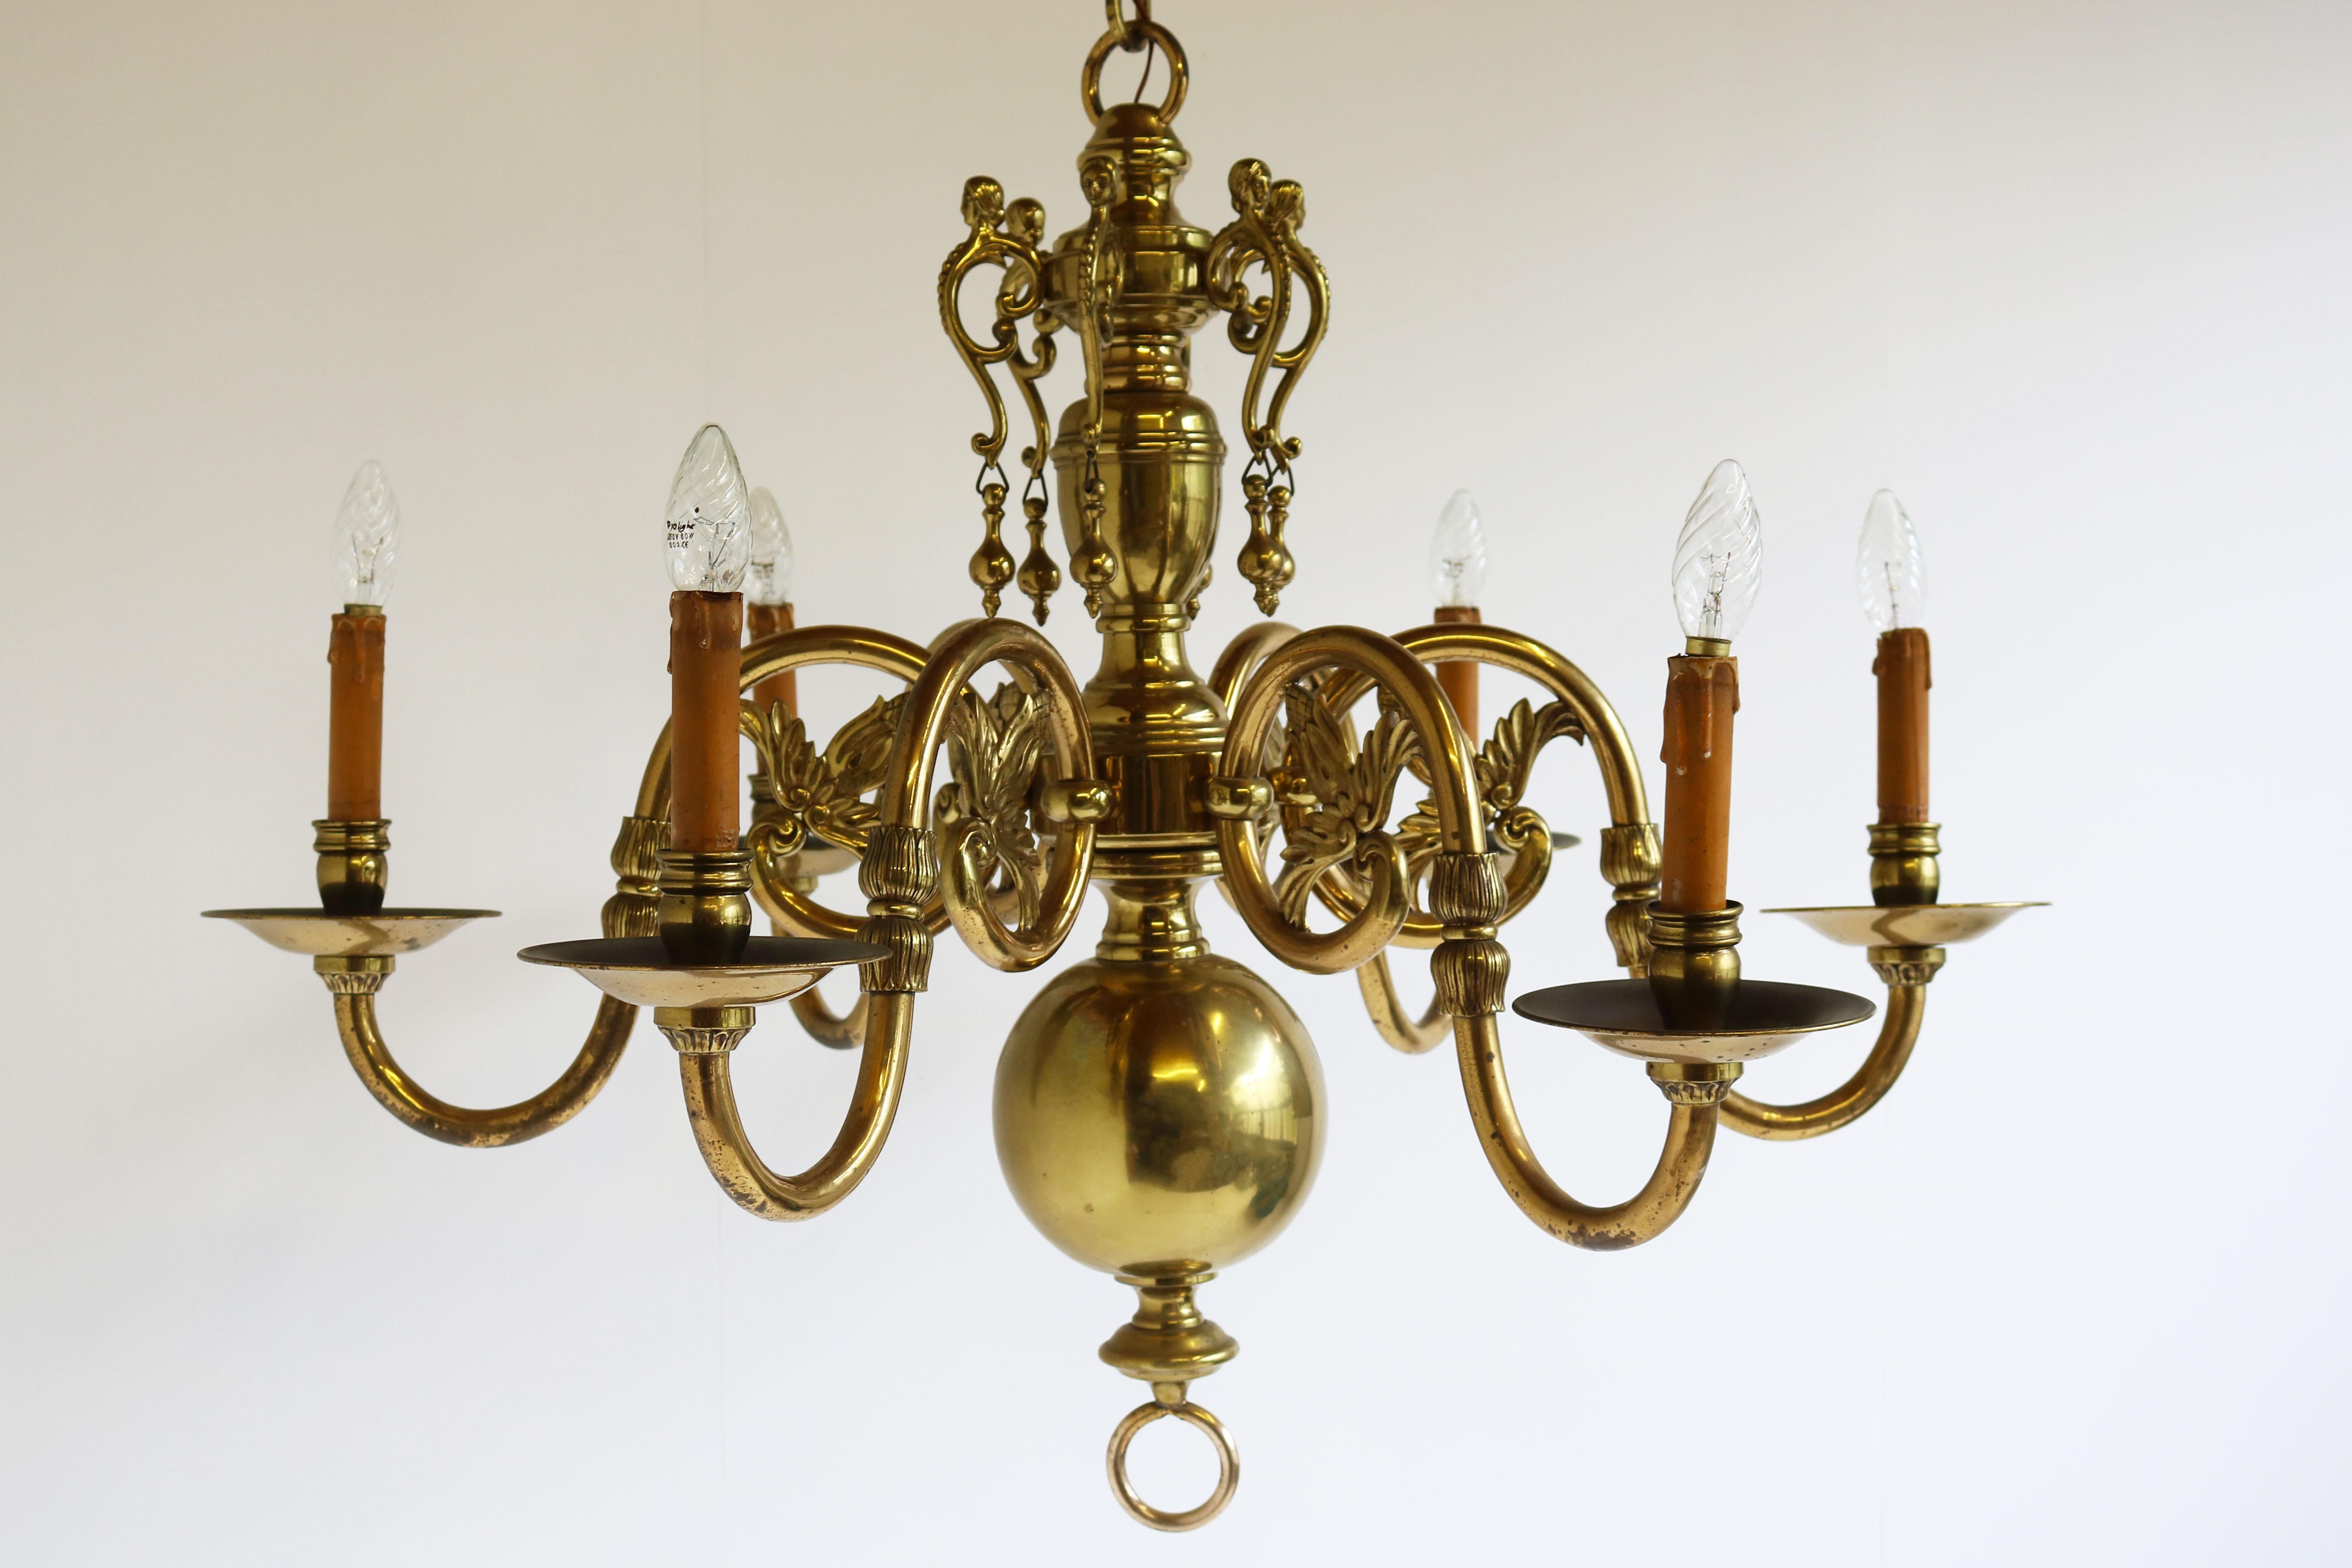 Very large & impressive Flemish chandelier from Belgium 19th century Georgian style / classical. 
Made from solid brass (21kg) very heavy, really amazing craftsmanship. 
The brass has a lovely aged patina and looks lovely (it is also possible to